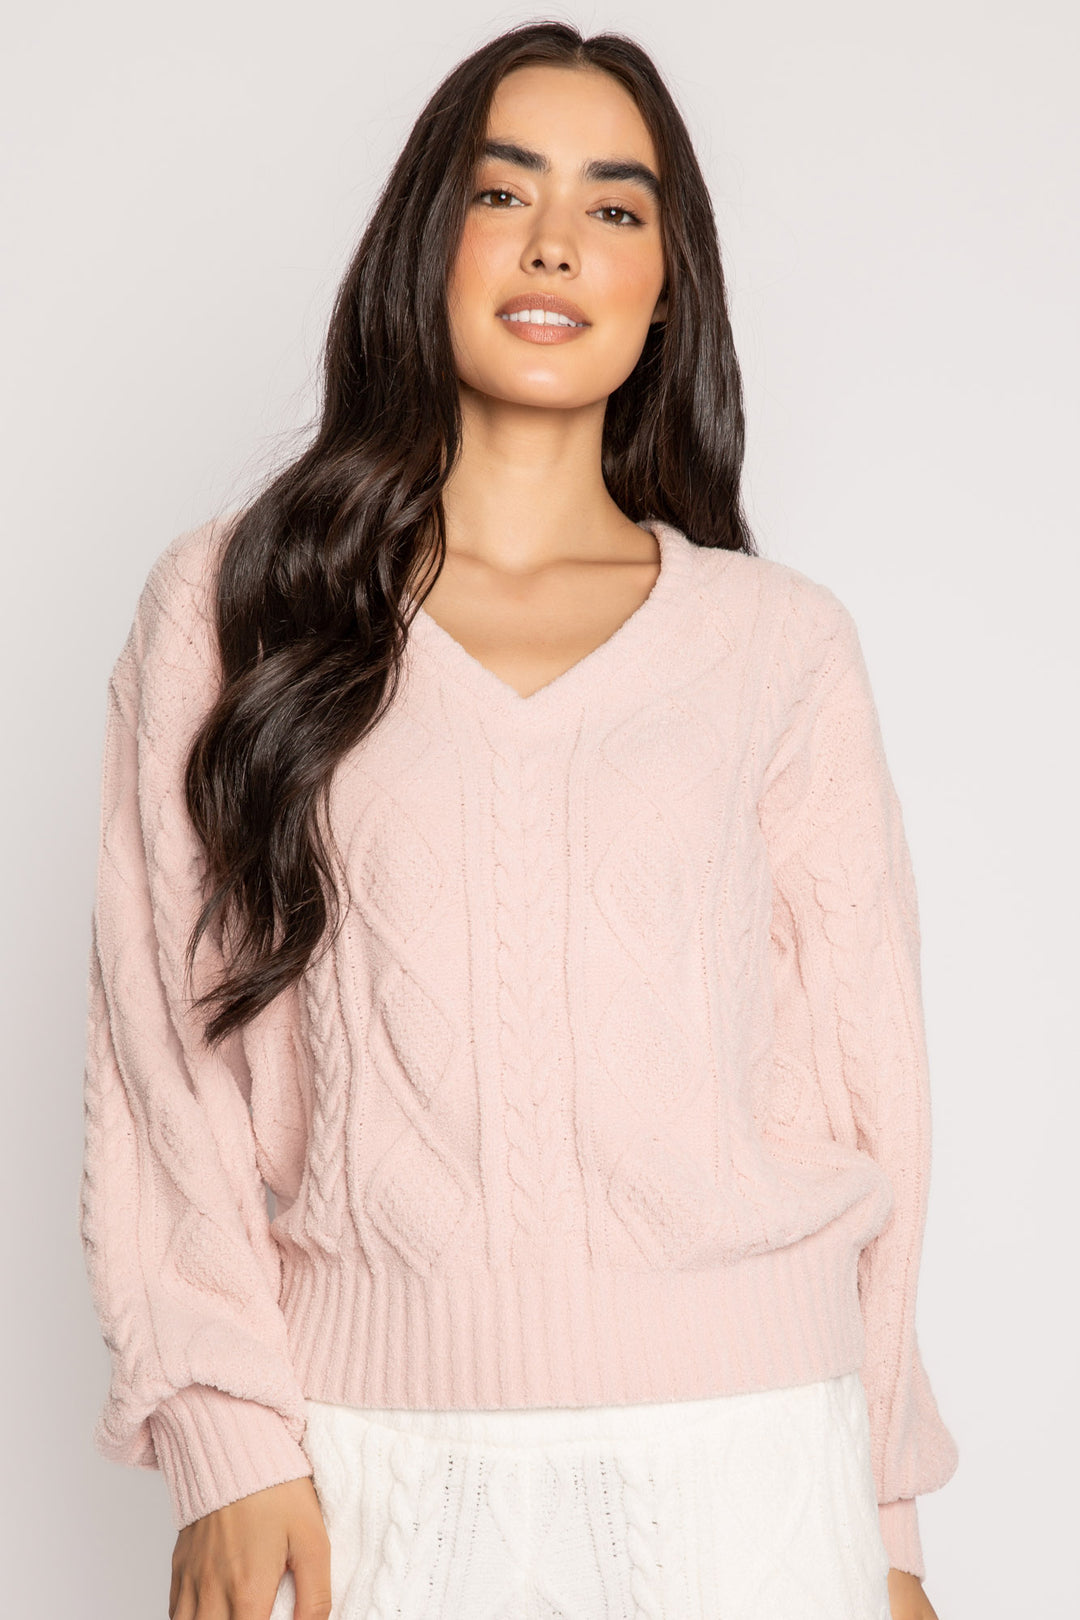 V-neck sweater in pink cable-textured chenille with rib hem & cuffs. (7231865946212)